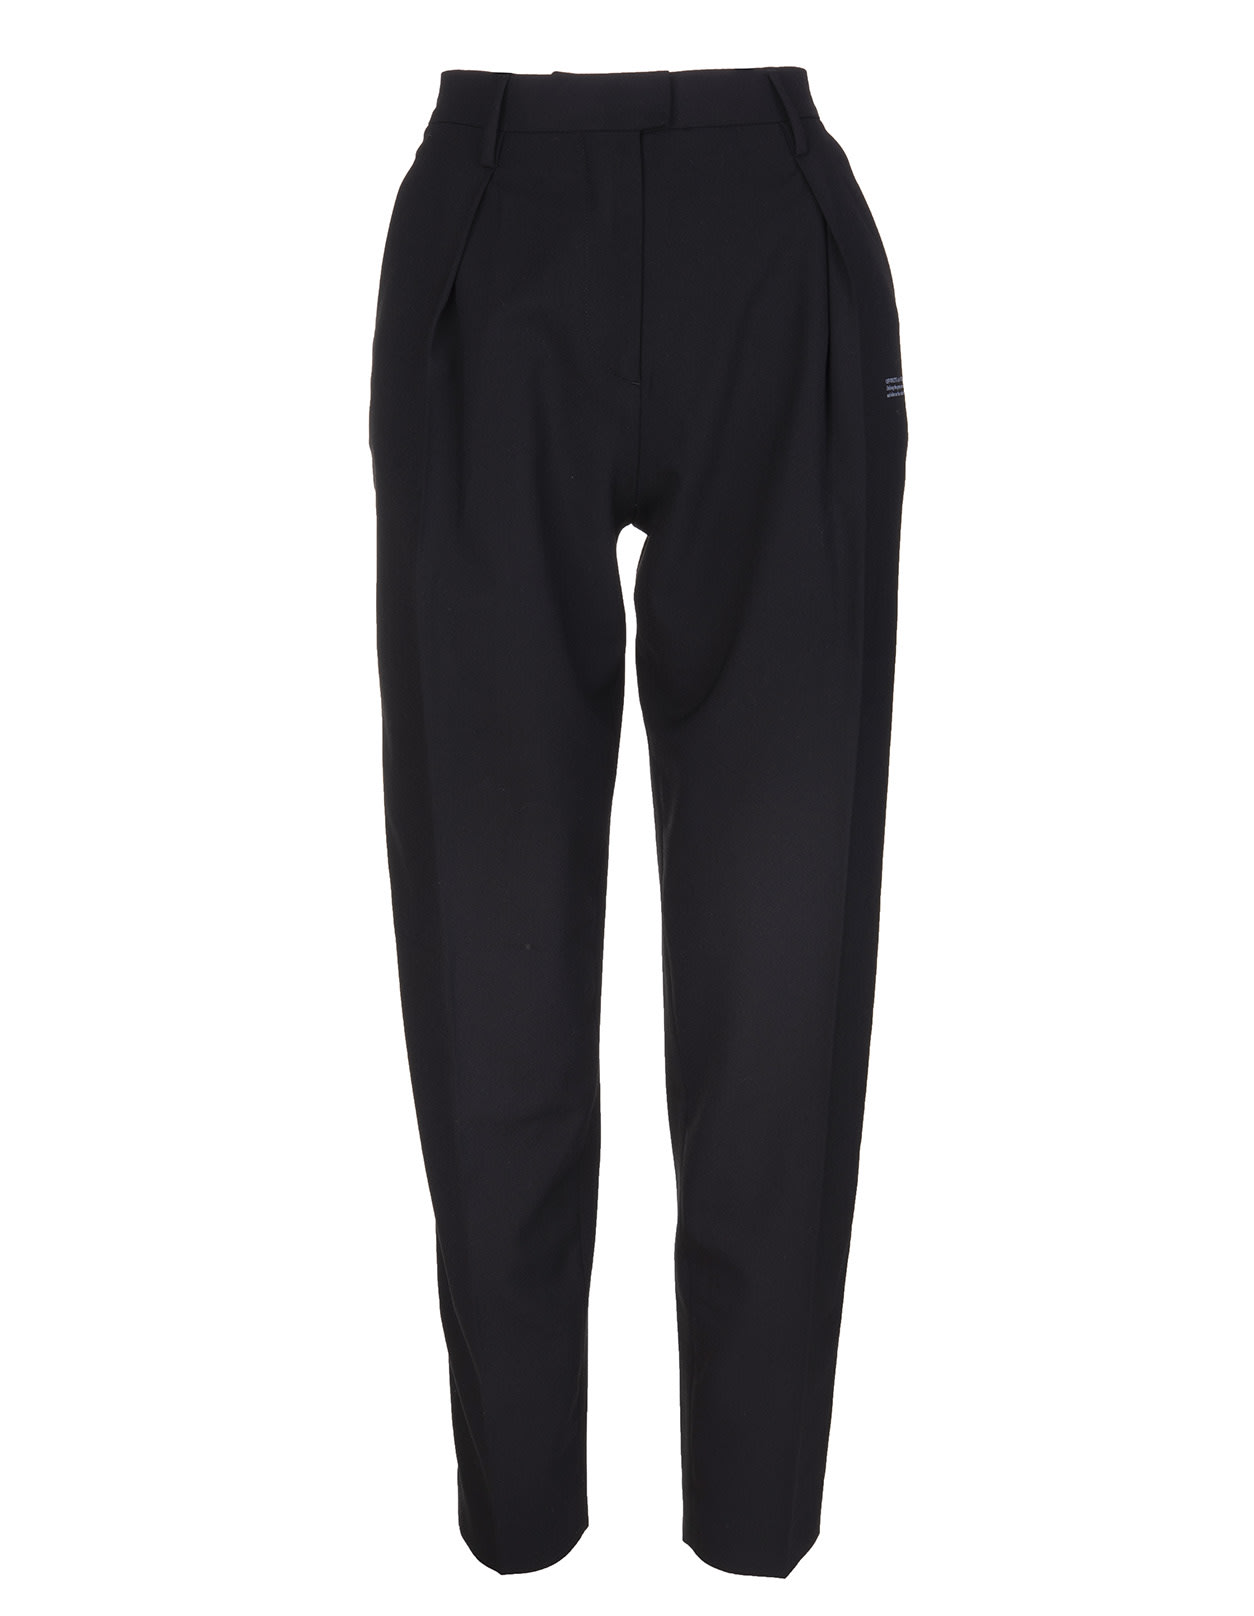 Off-White Woman Black Tapered Stretch Wool Trousers